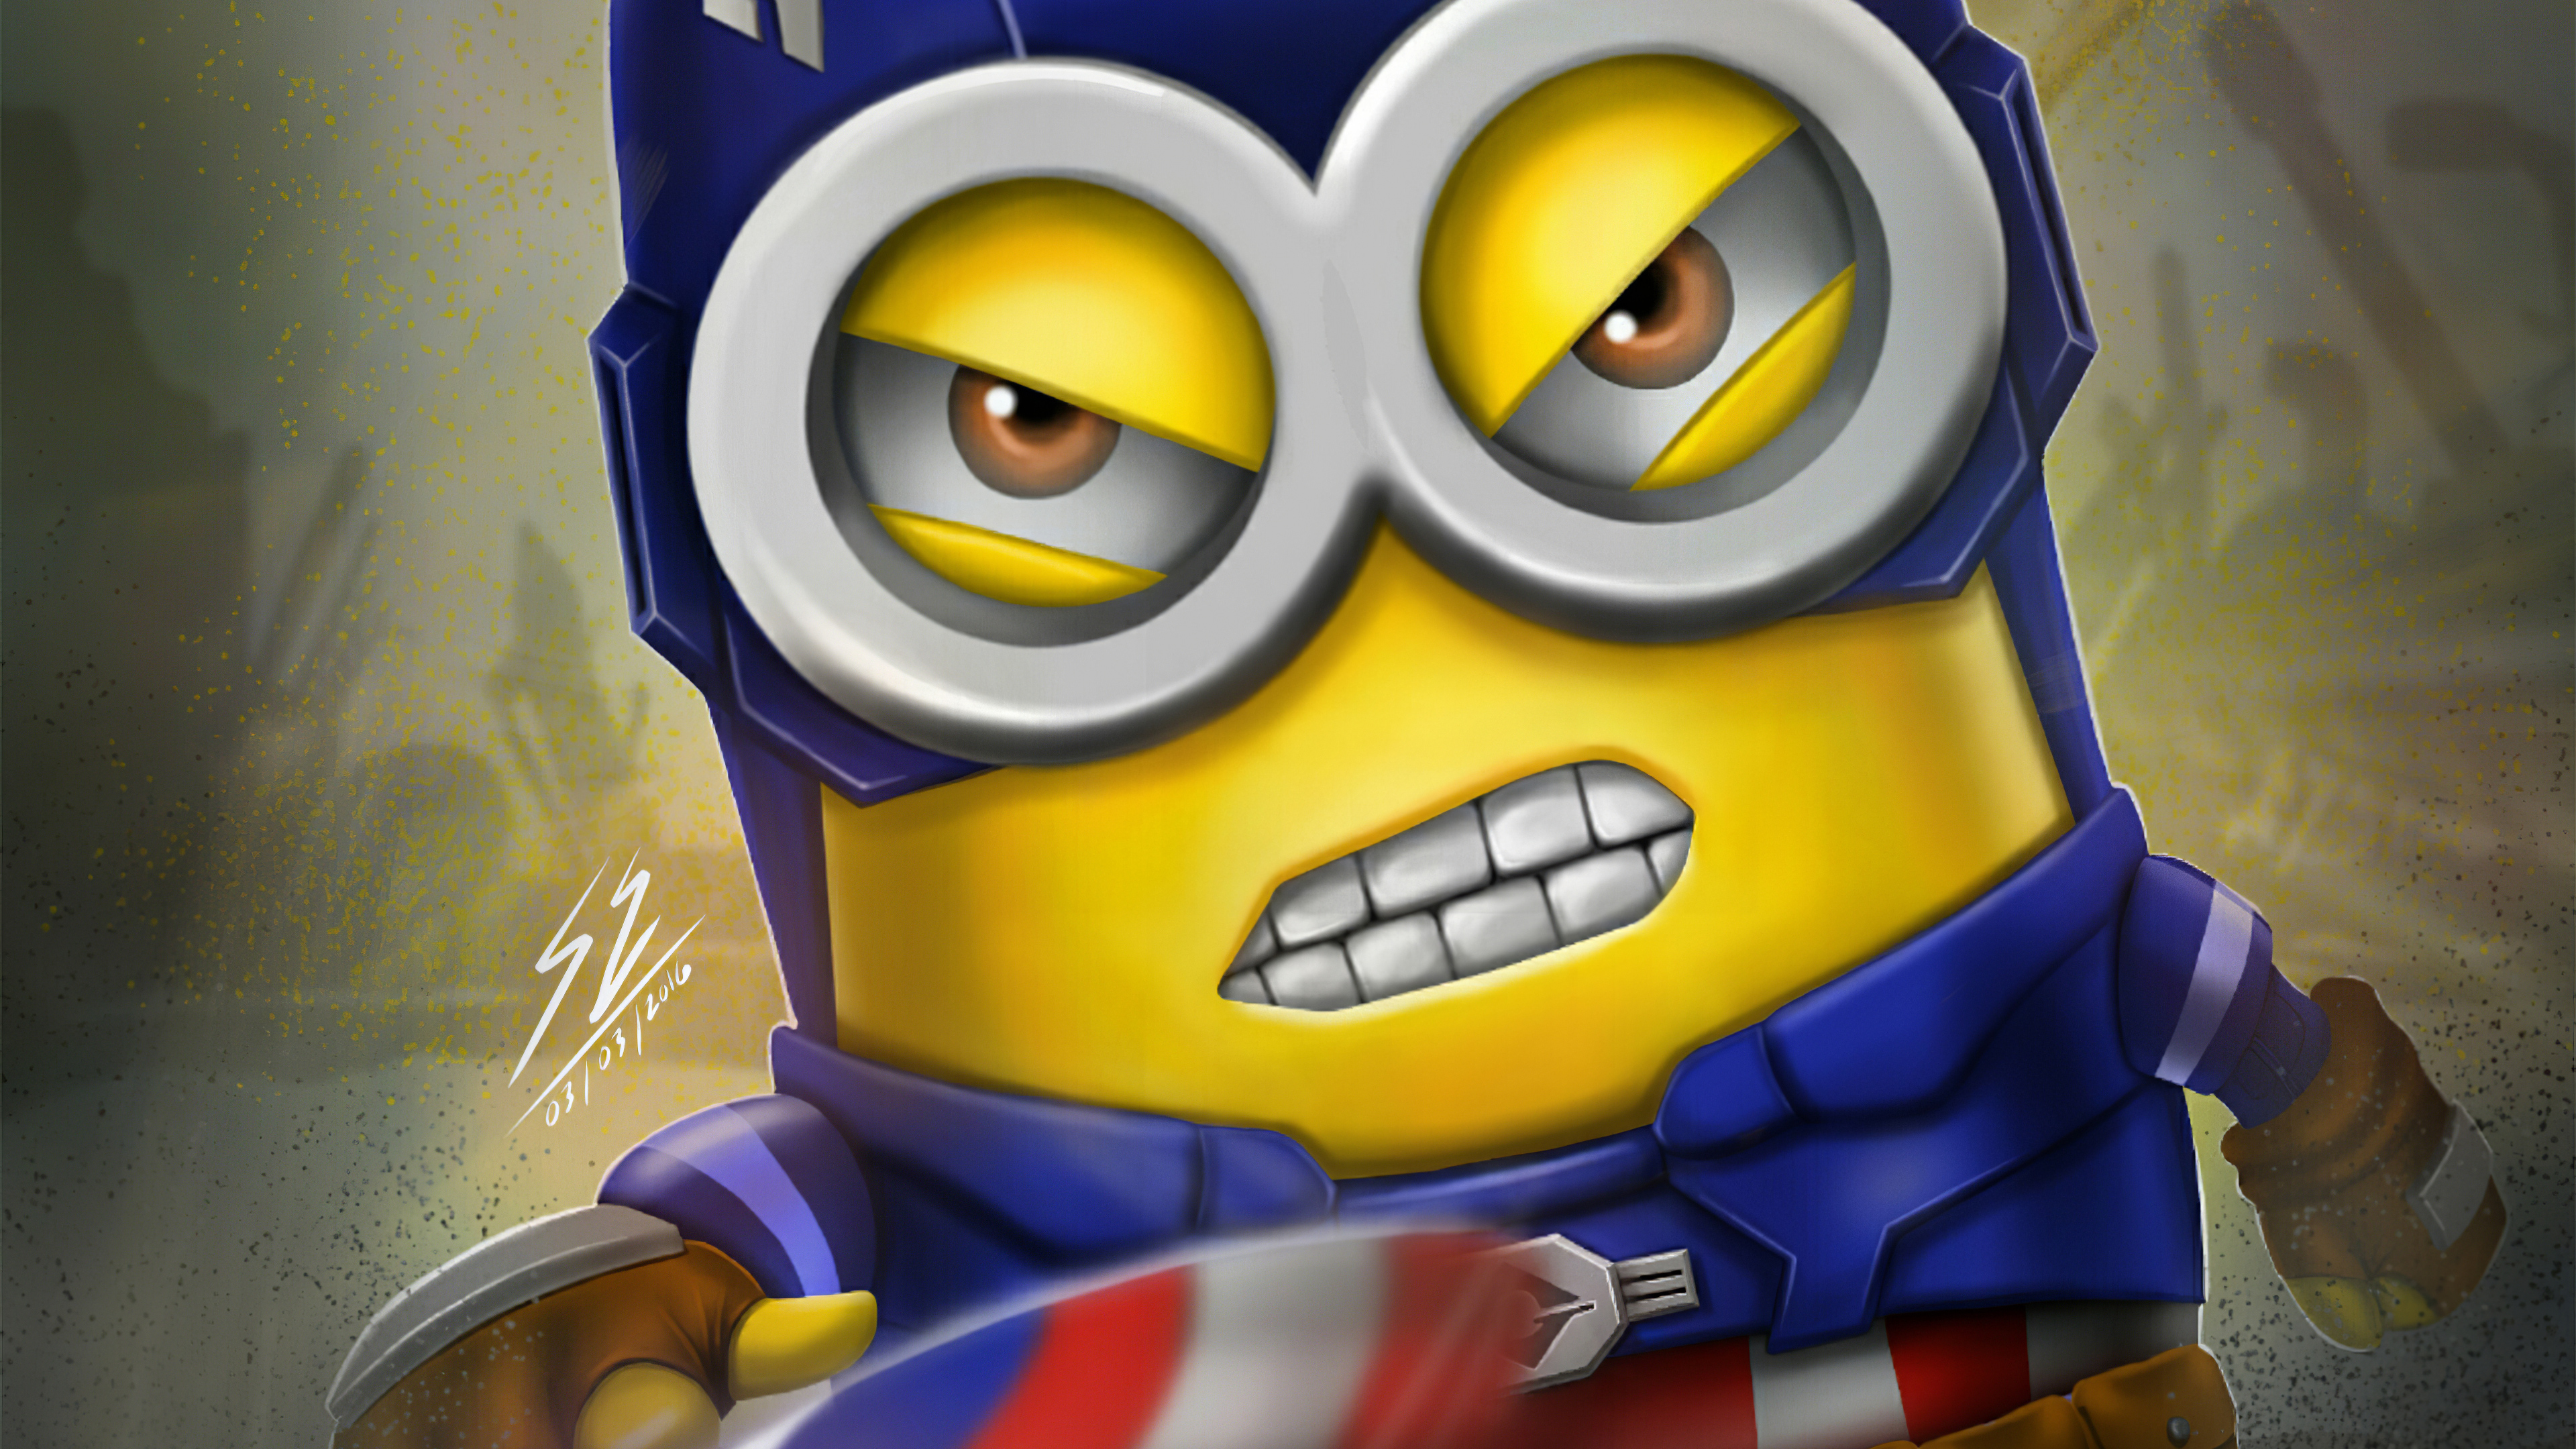 Minion As Captain America 4k, HD Superheroes, 4k Wallpapers, Images